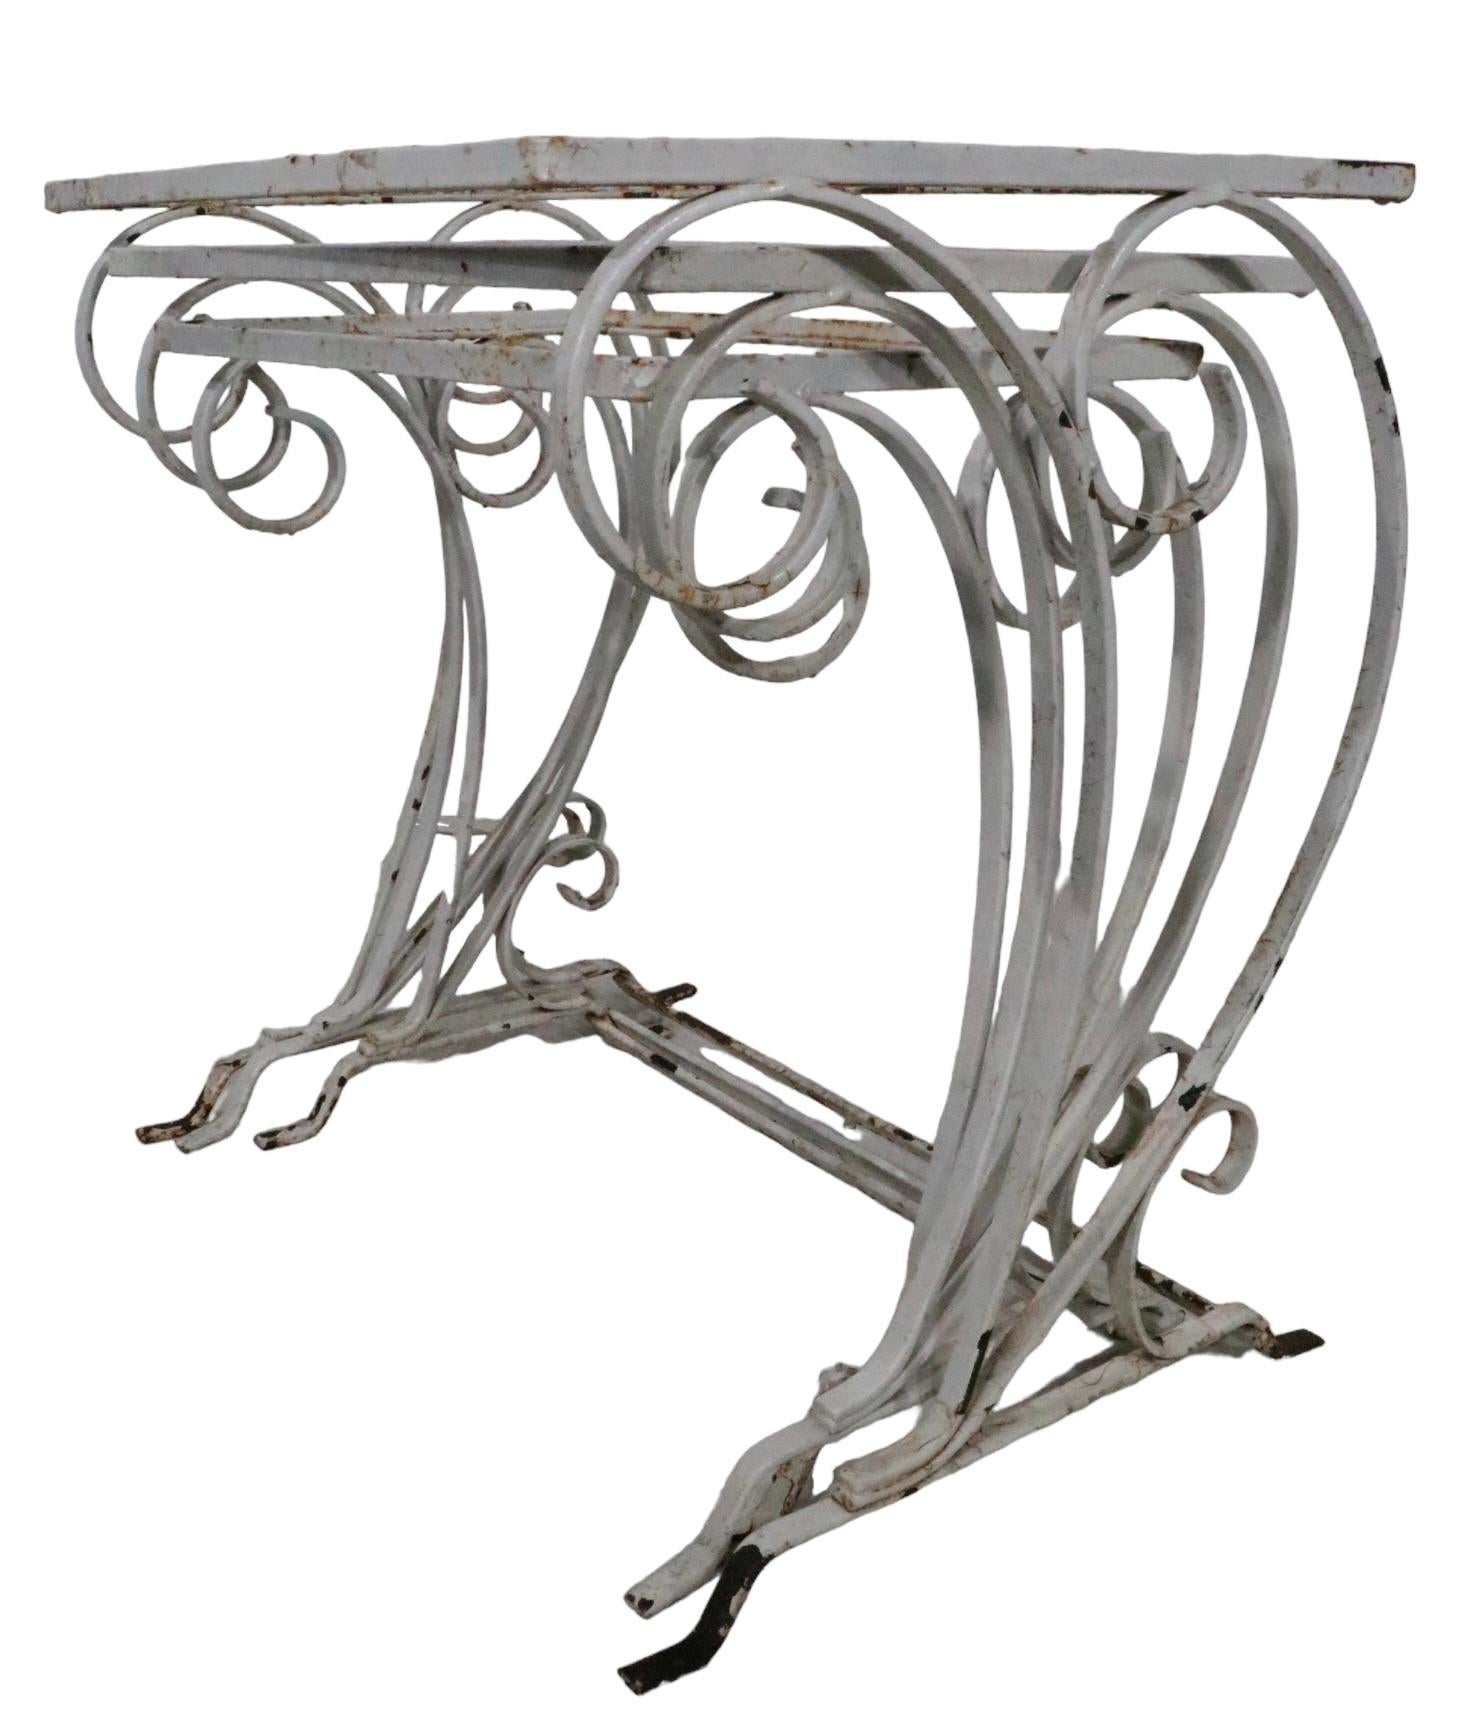 American Nest of 3 Art Deco Mid Century Wrought Iron Patio Garden Tables by Salterini For Sale